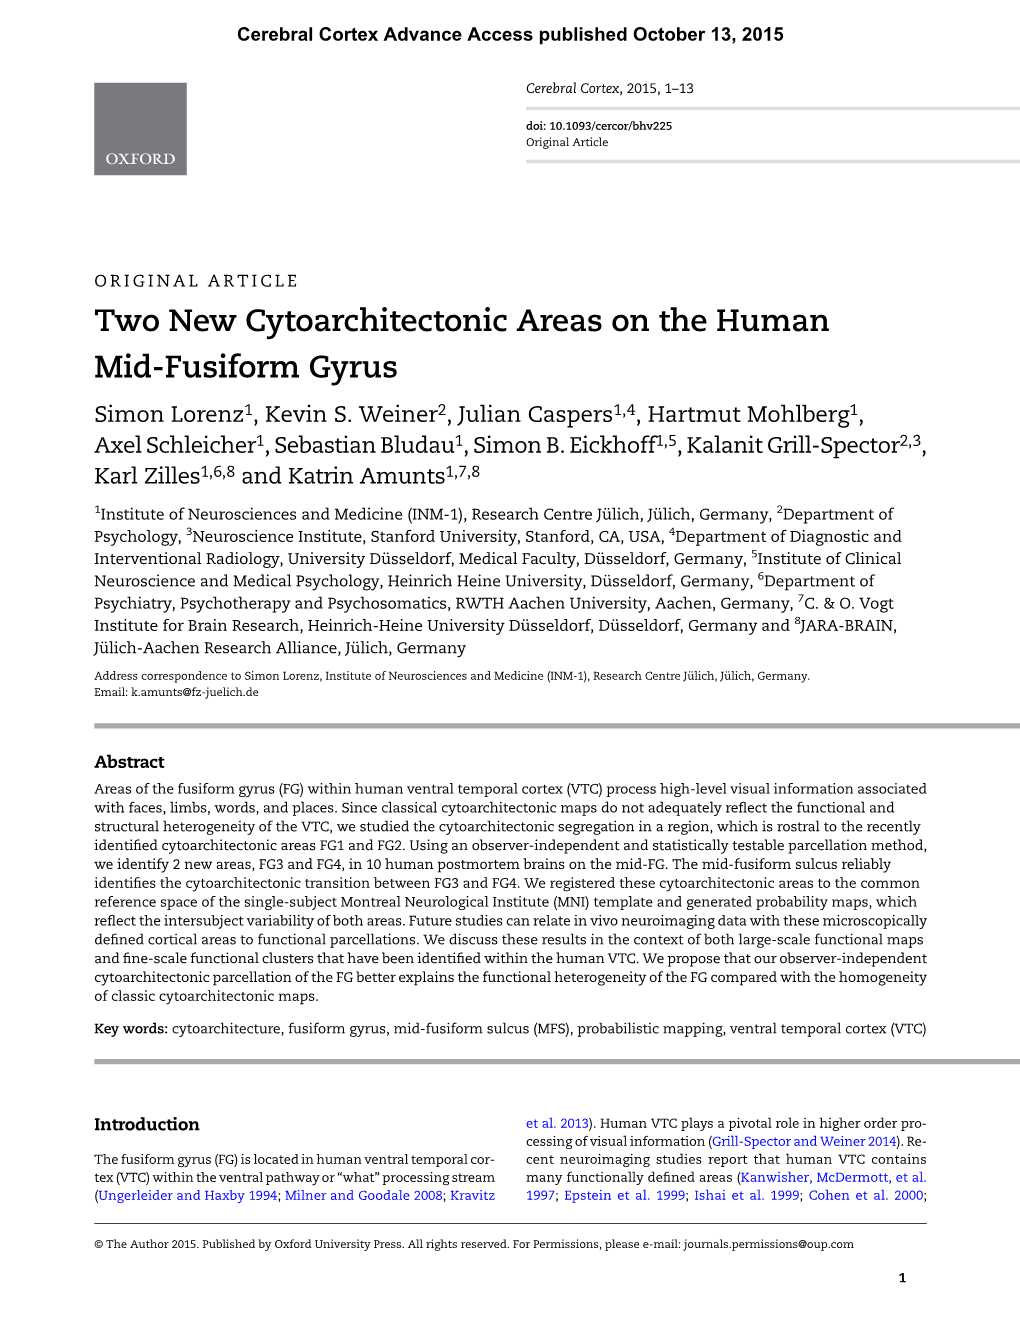 Two New Cytoarchitectonic Areas on the Human Mid-Fusiform Gyrus Simon Lorenz1, Kevin S